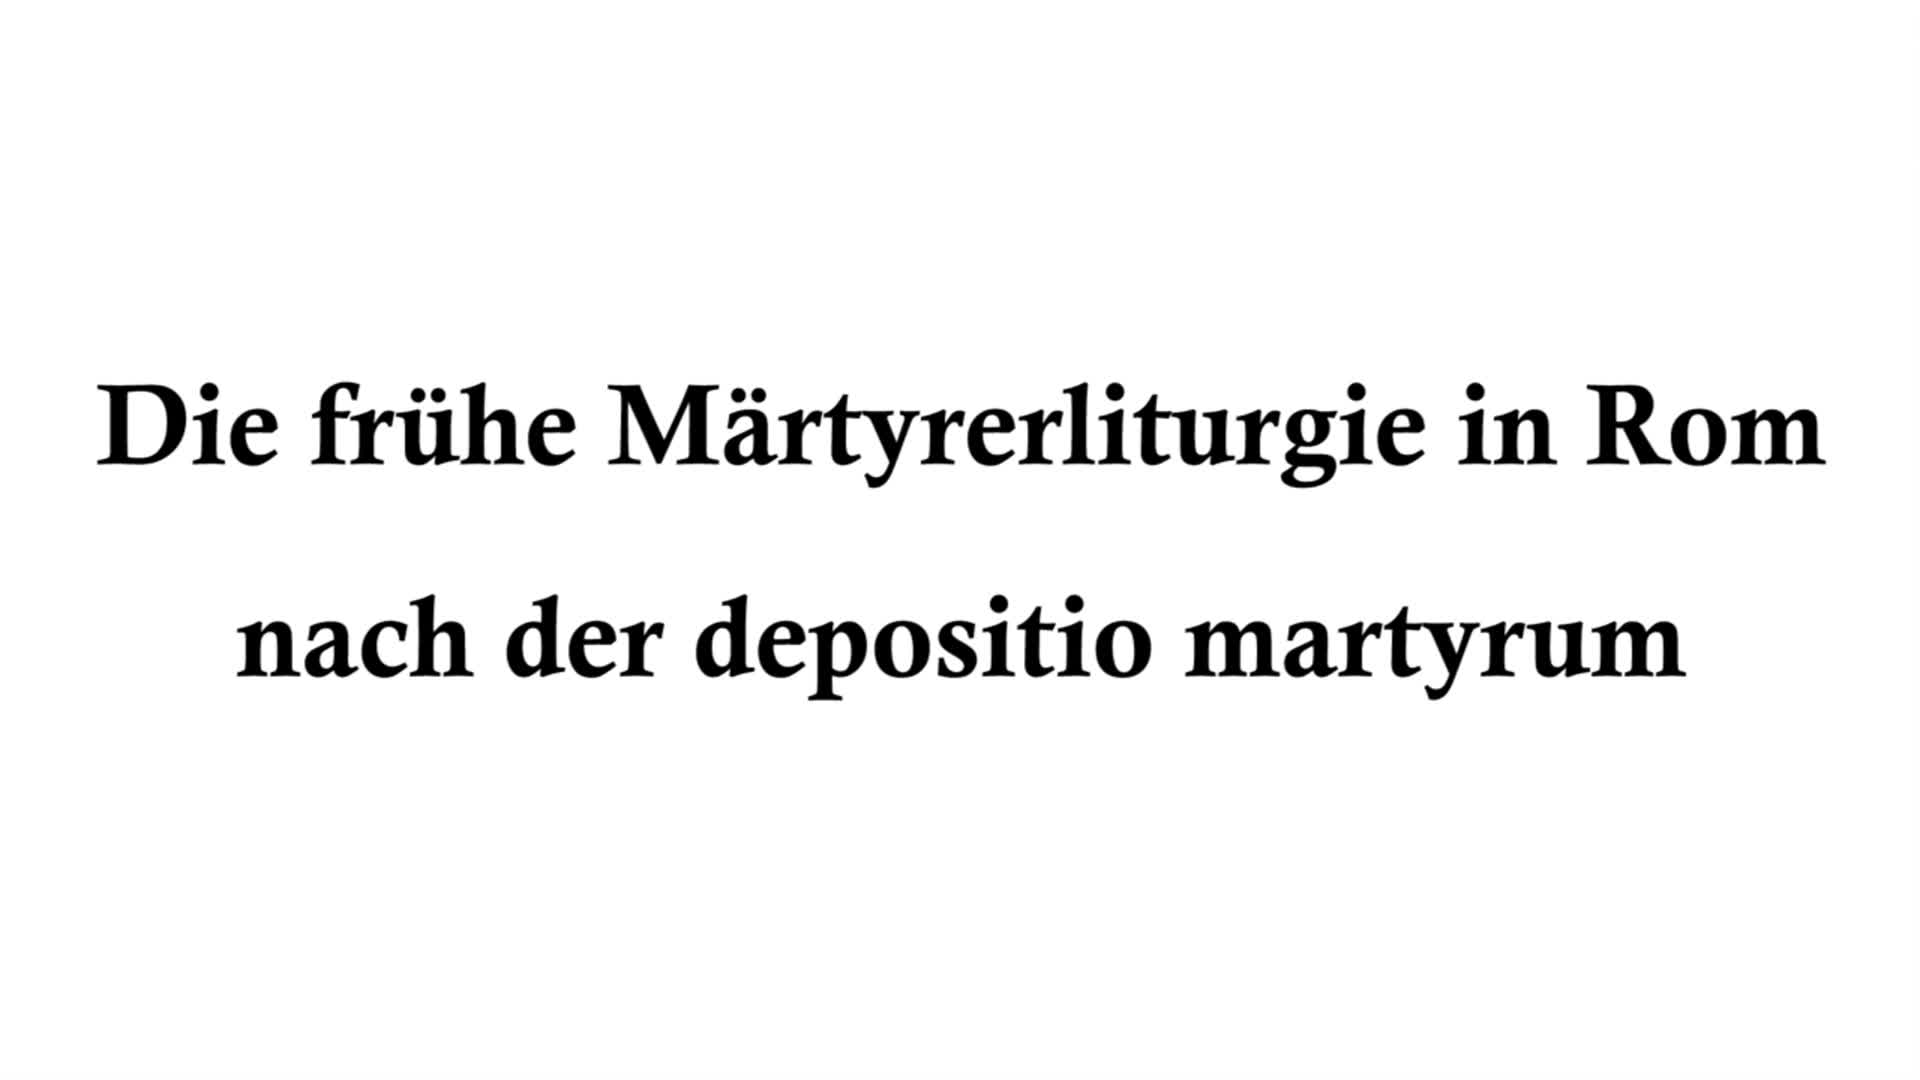 Deposito Martyrum preview image